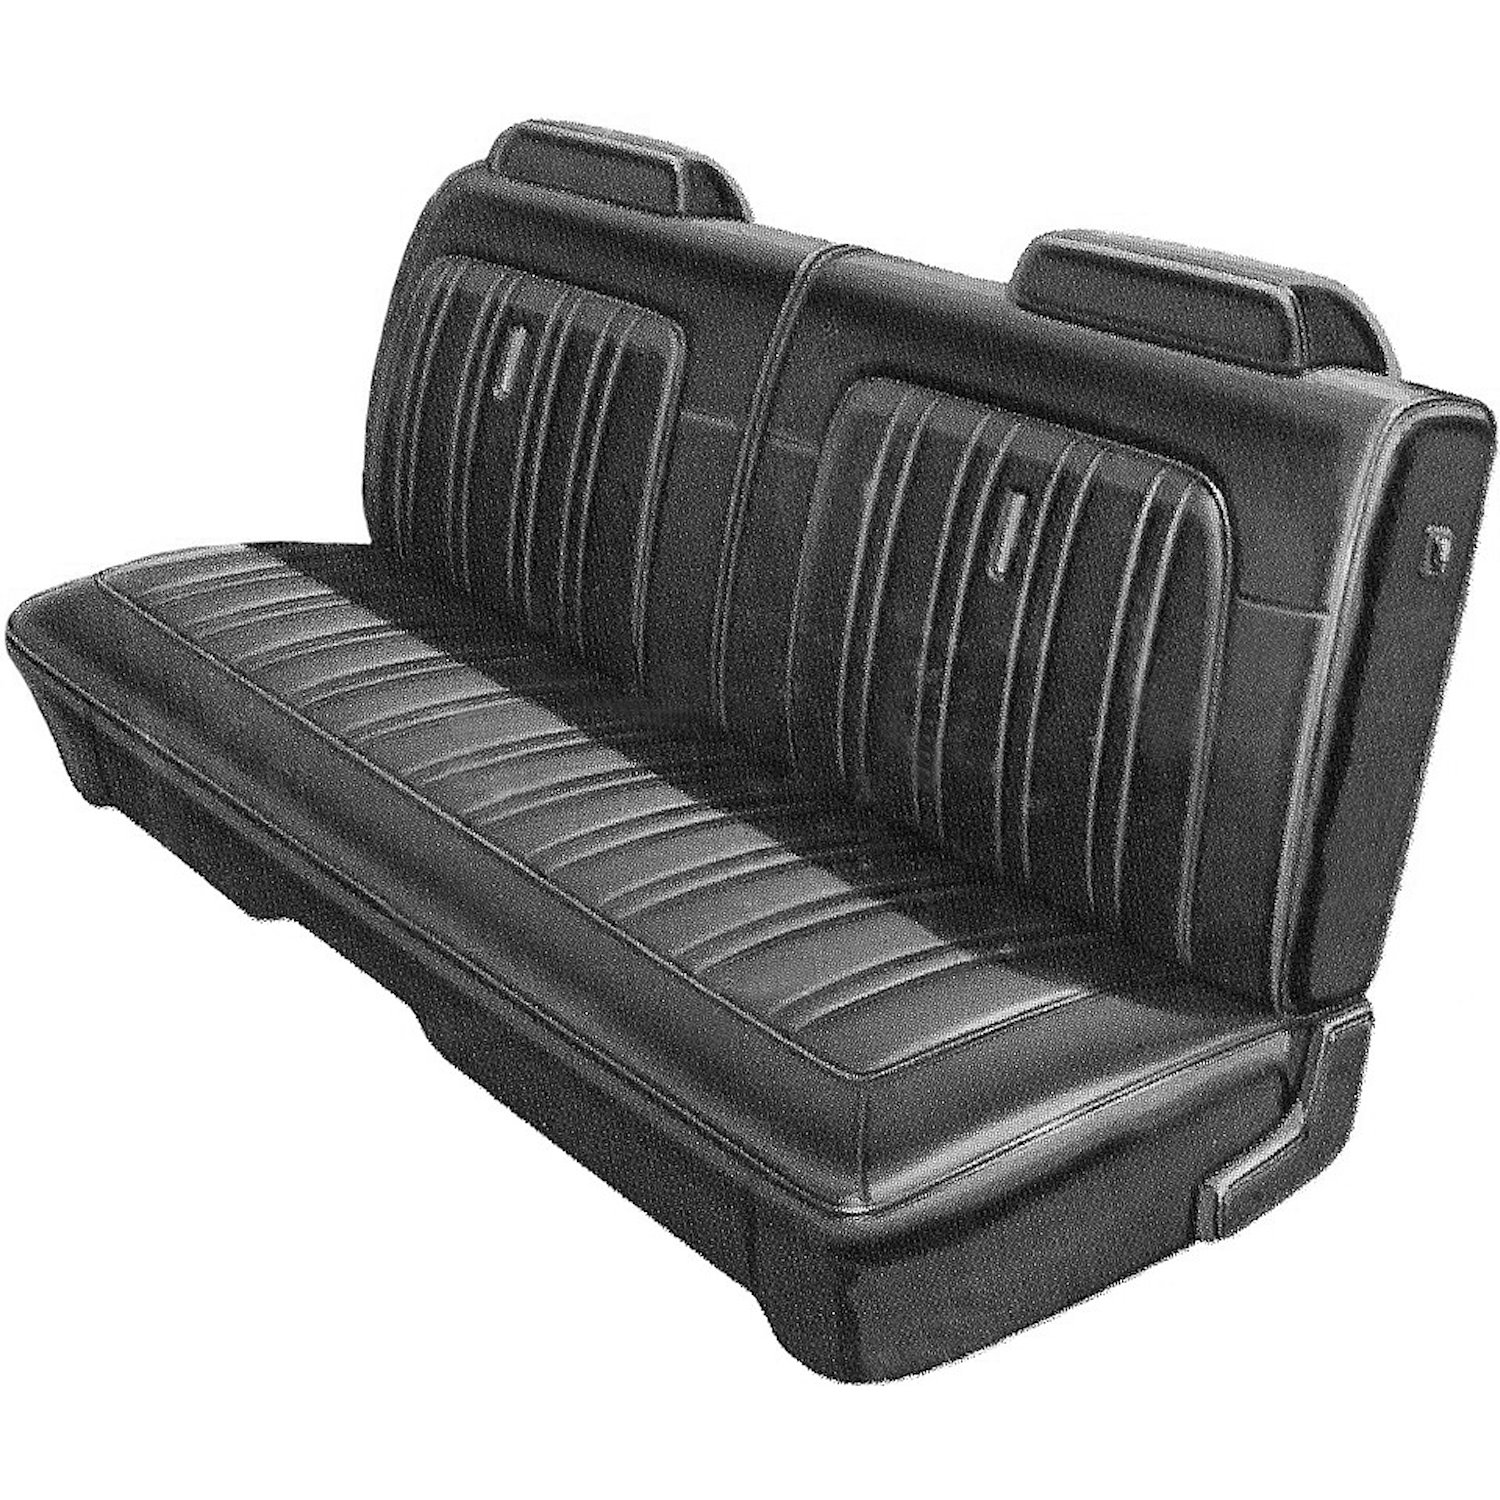 AA74CX00020100 74 CHARGER FRONT SPLIT BENCH - BLACK